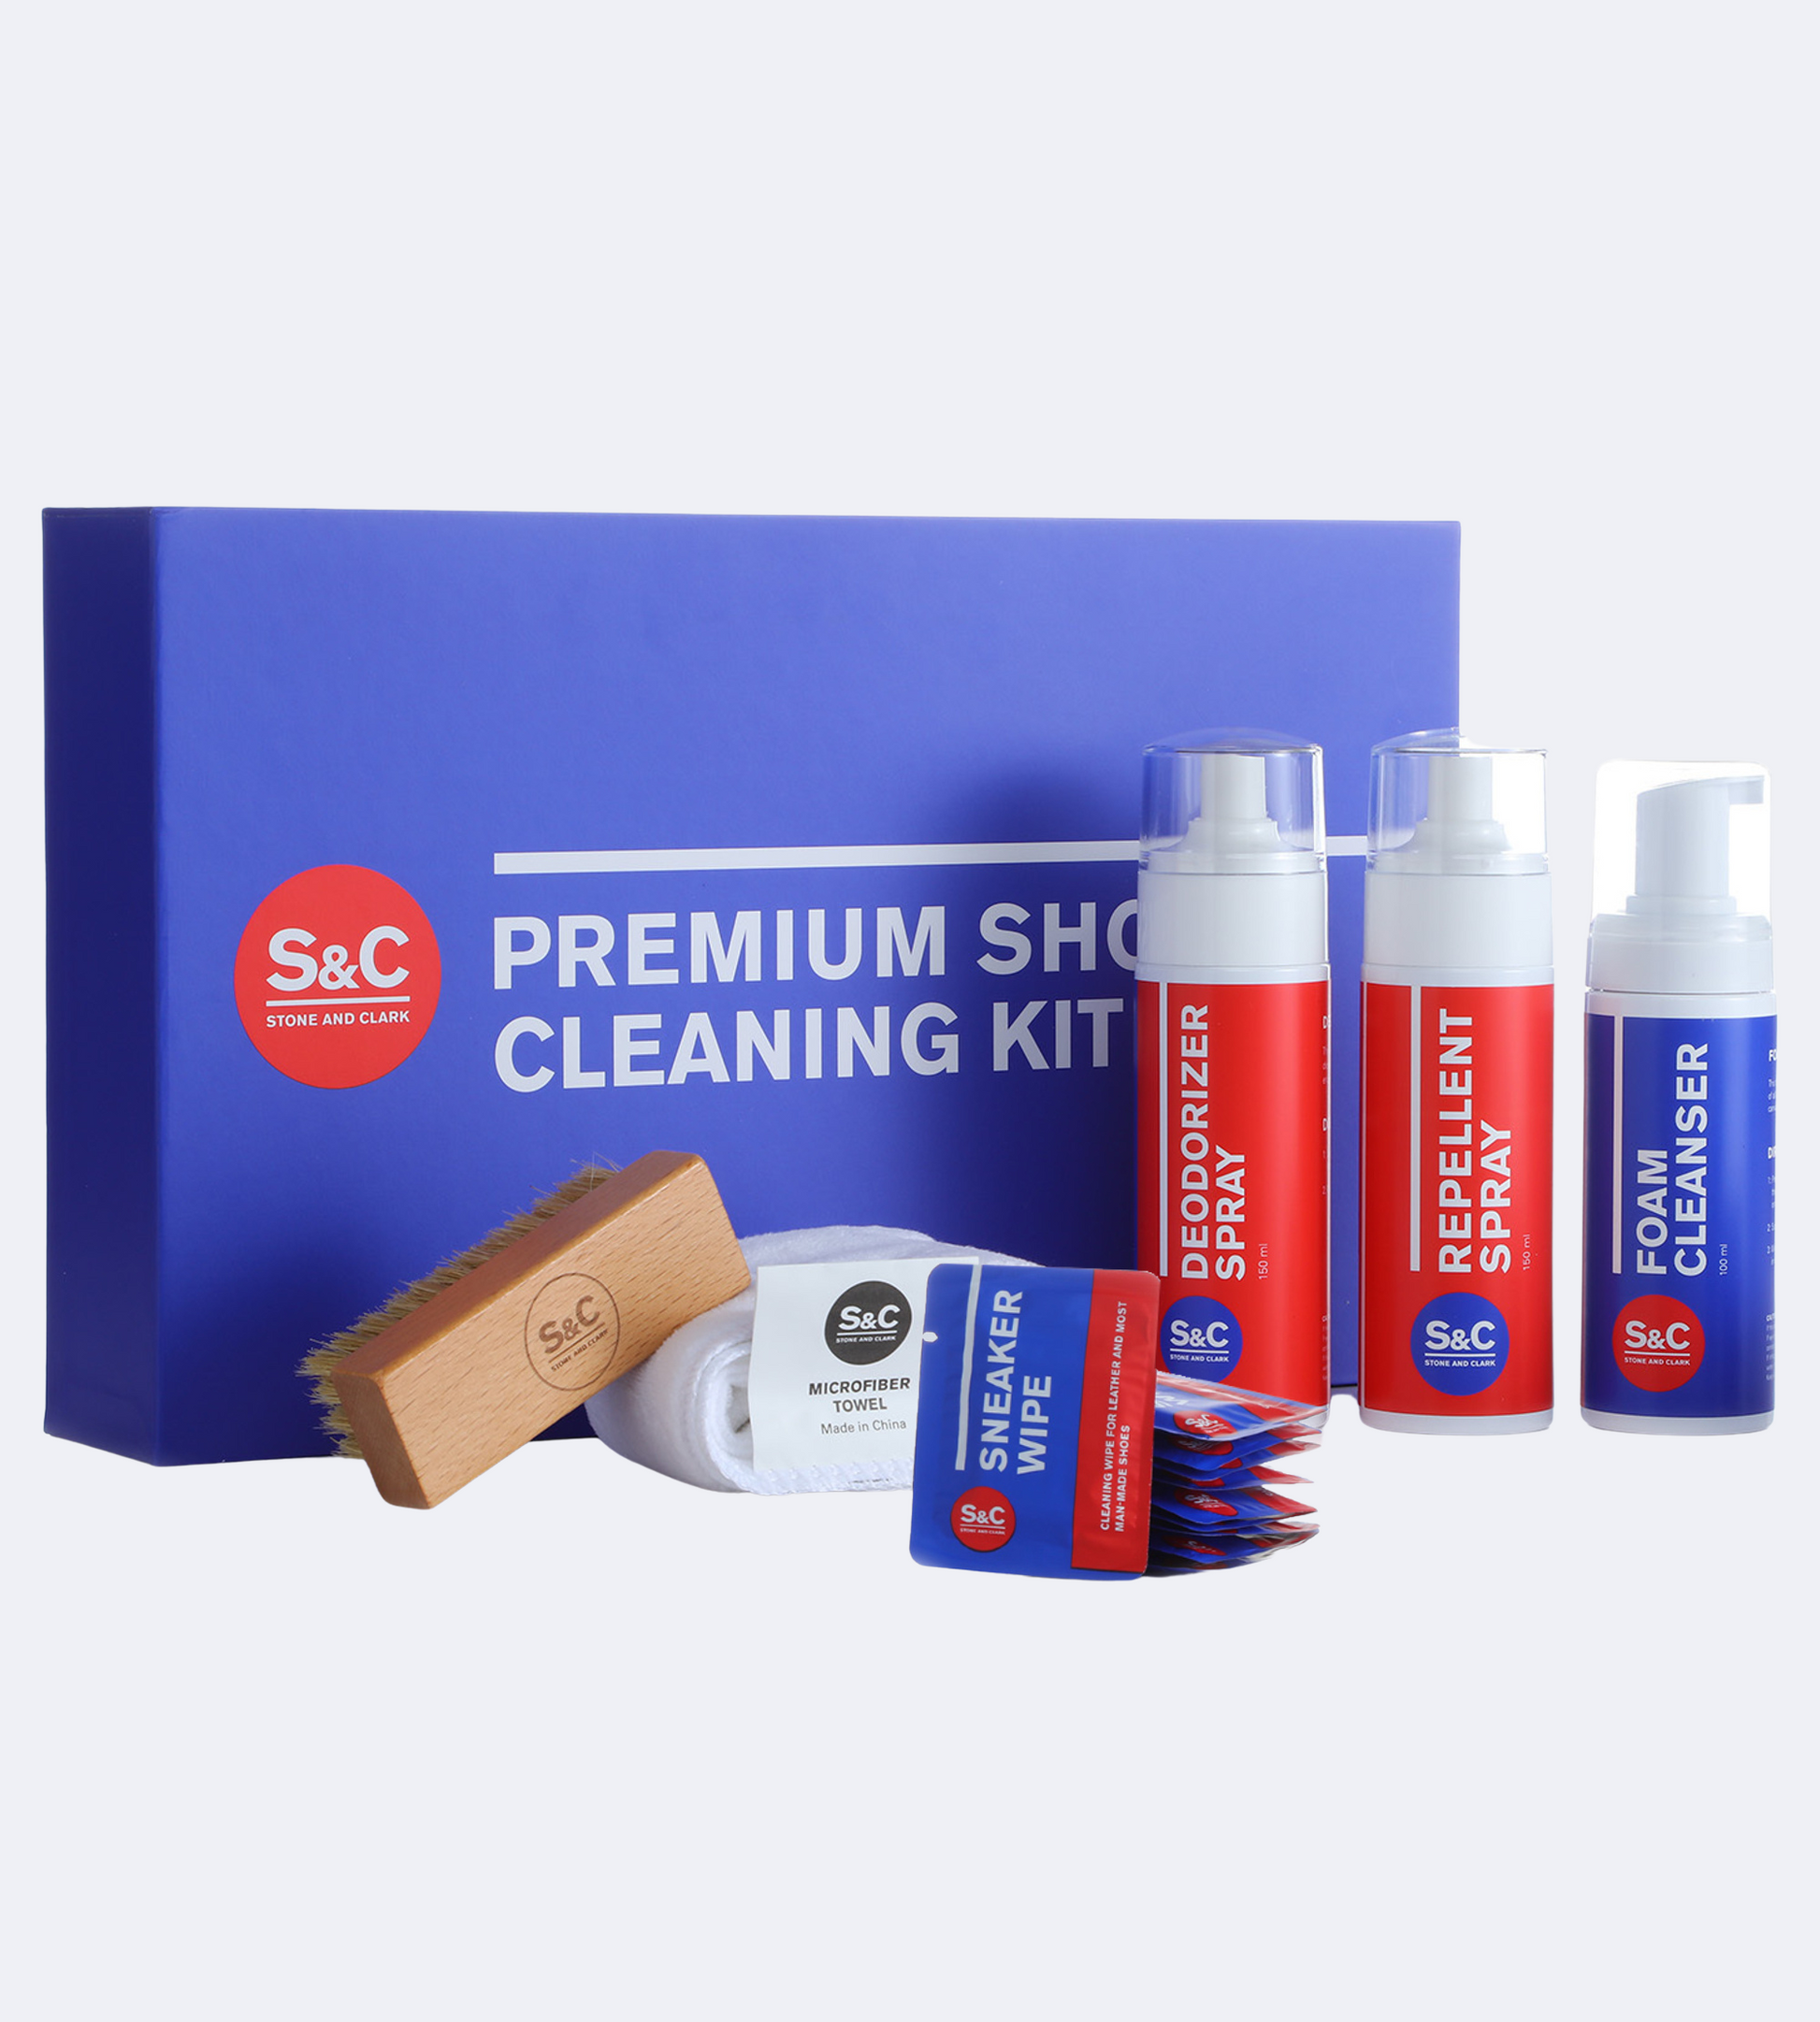 All-In-One Sneaker Care Kit